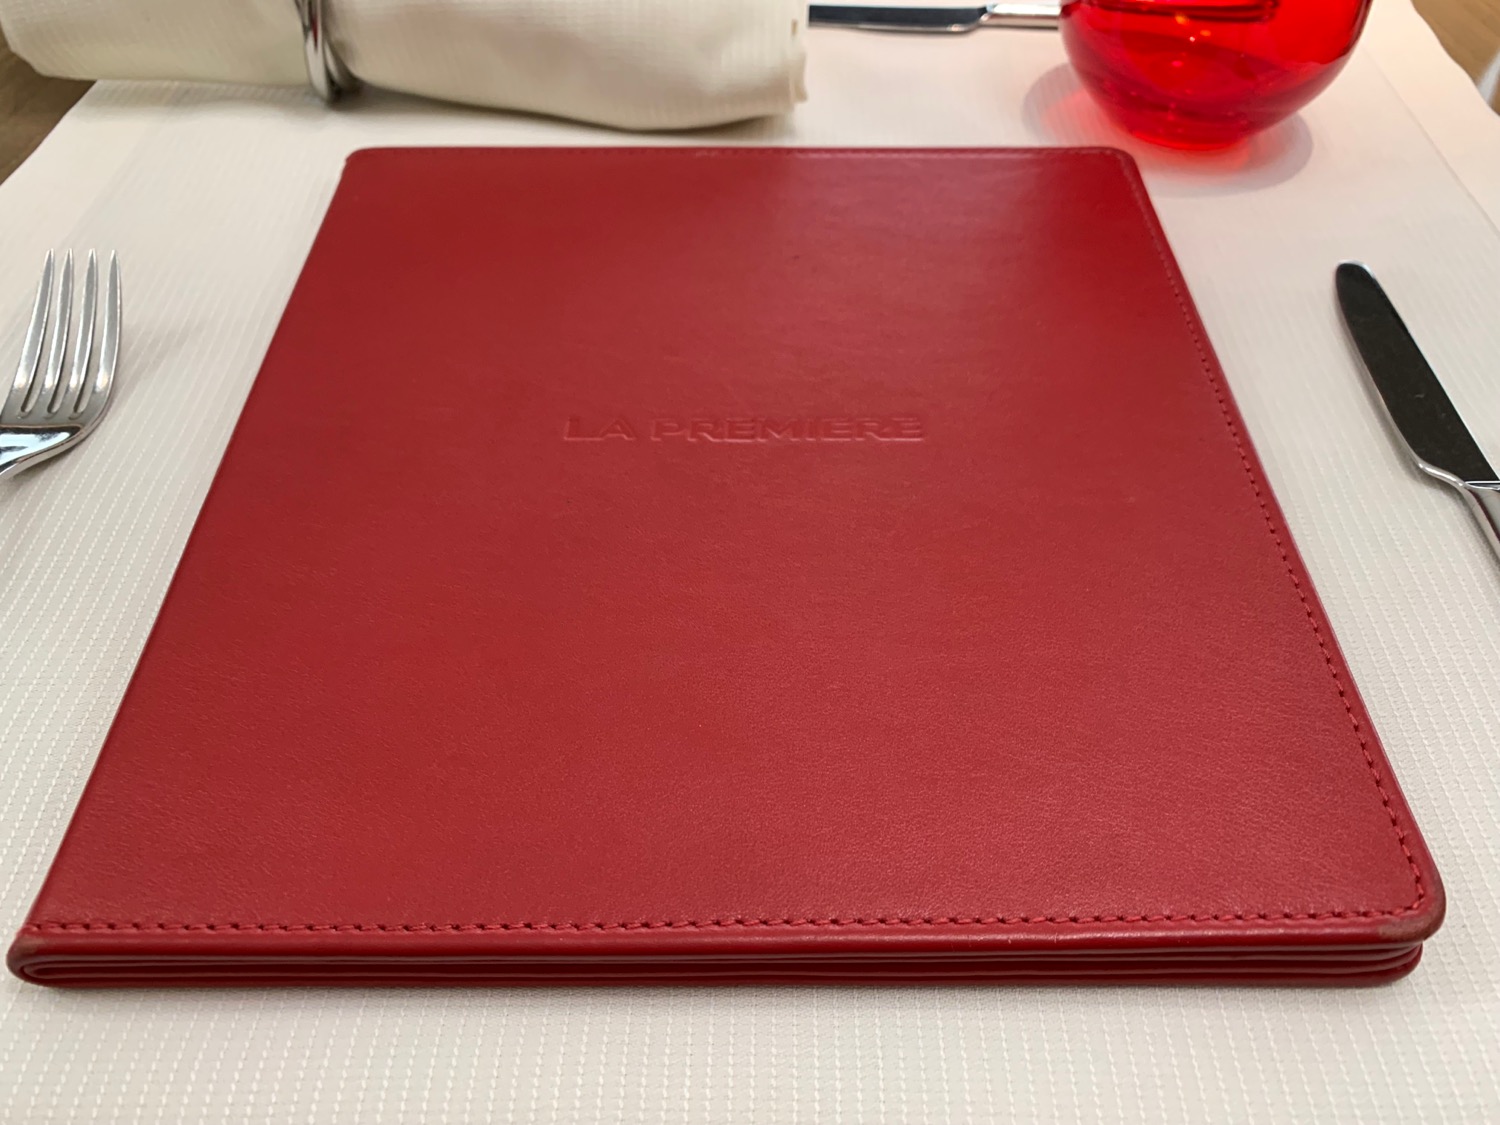 a red leather cover on a table